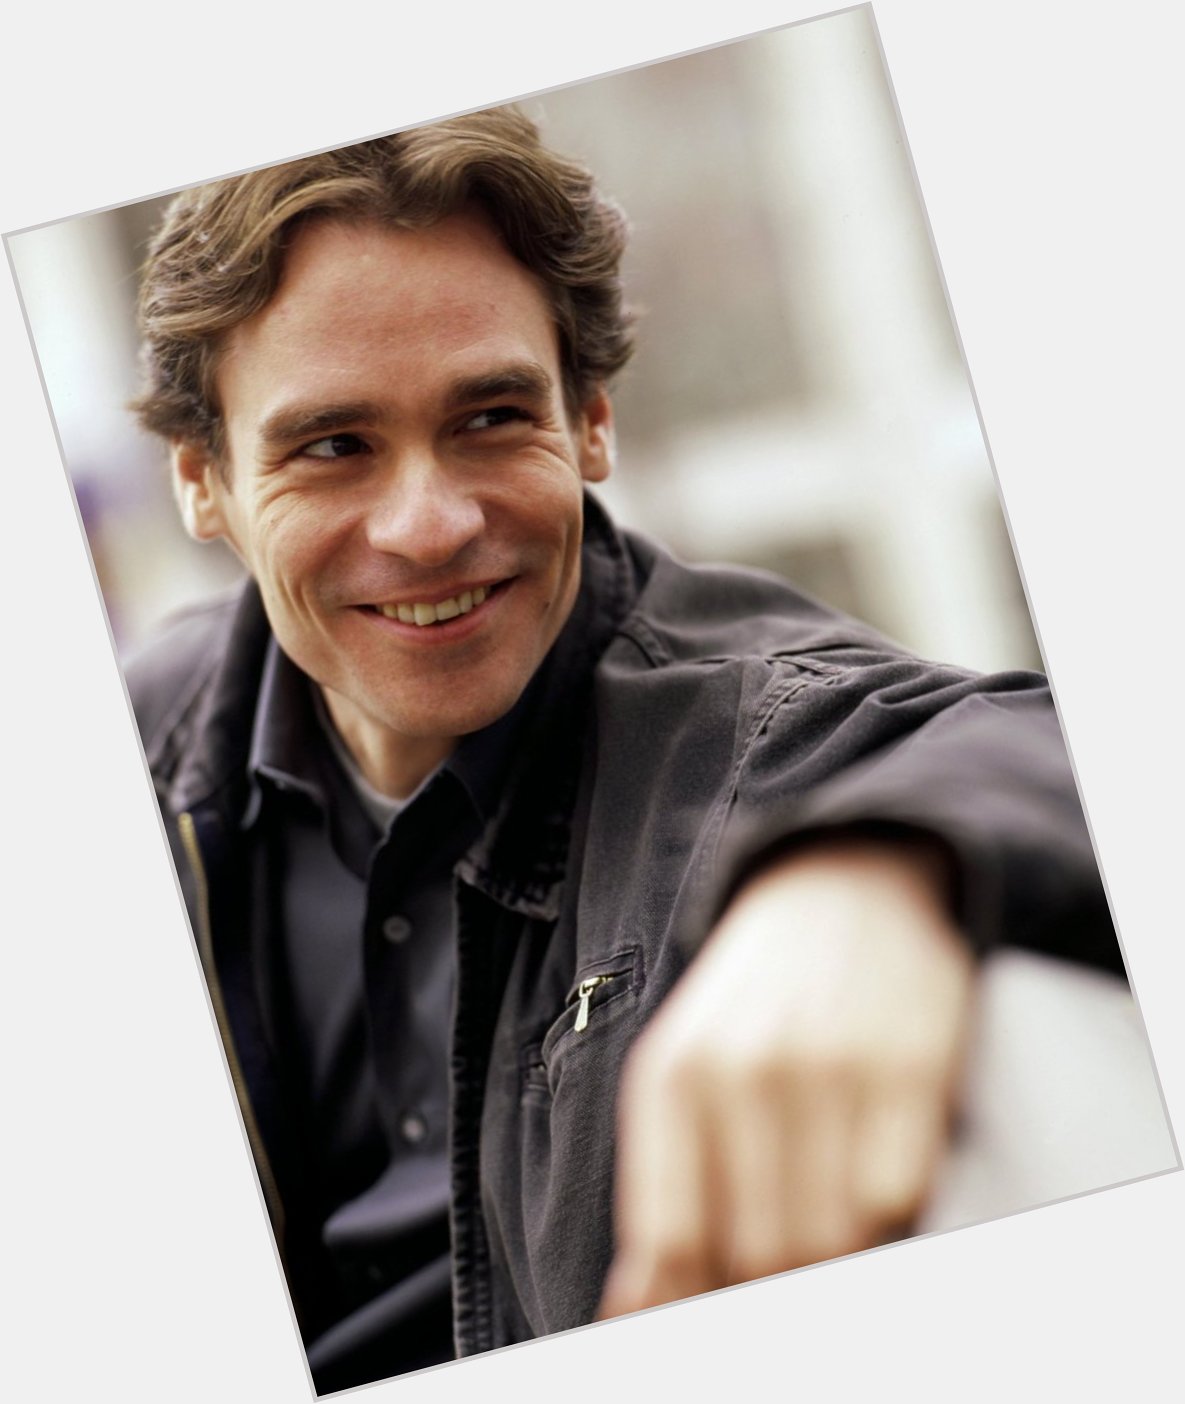 Happy birthday to Robert Sean Leonard, who I forever have a crush on.  